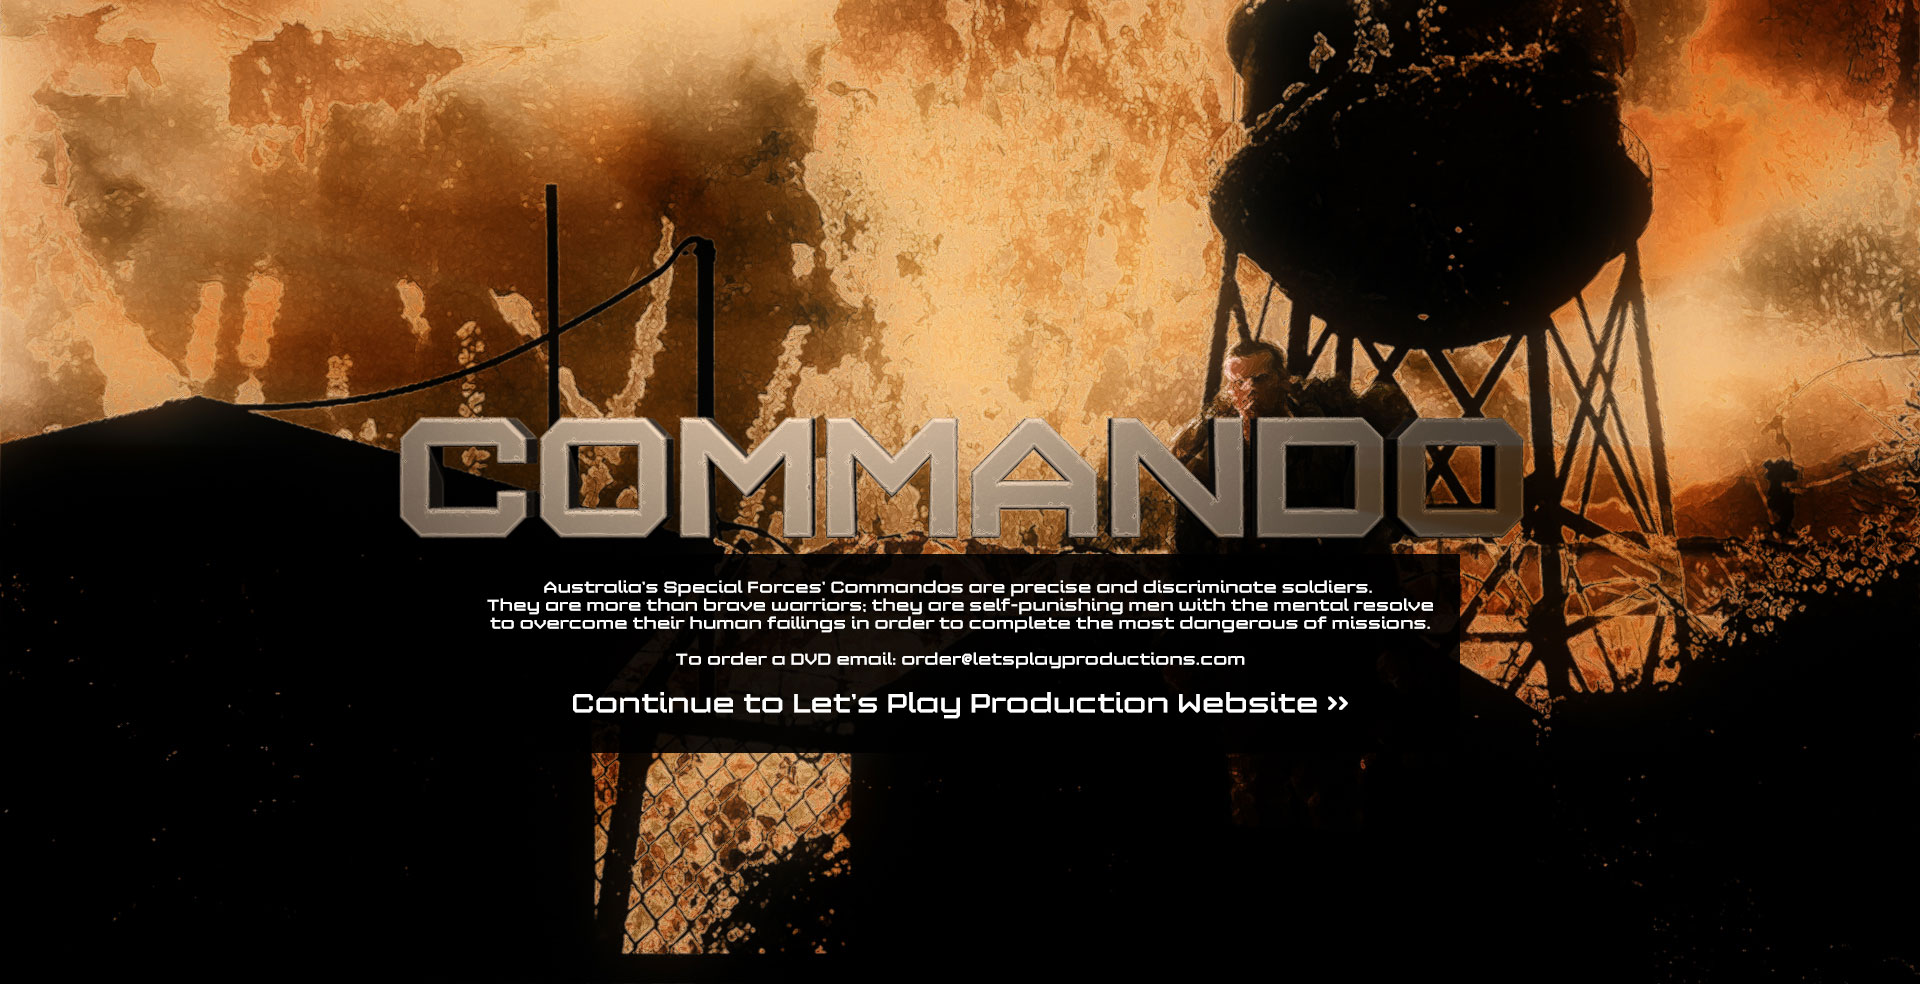 Command DVD out now from Let's Play Productions